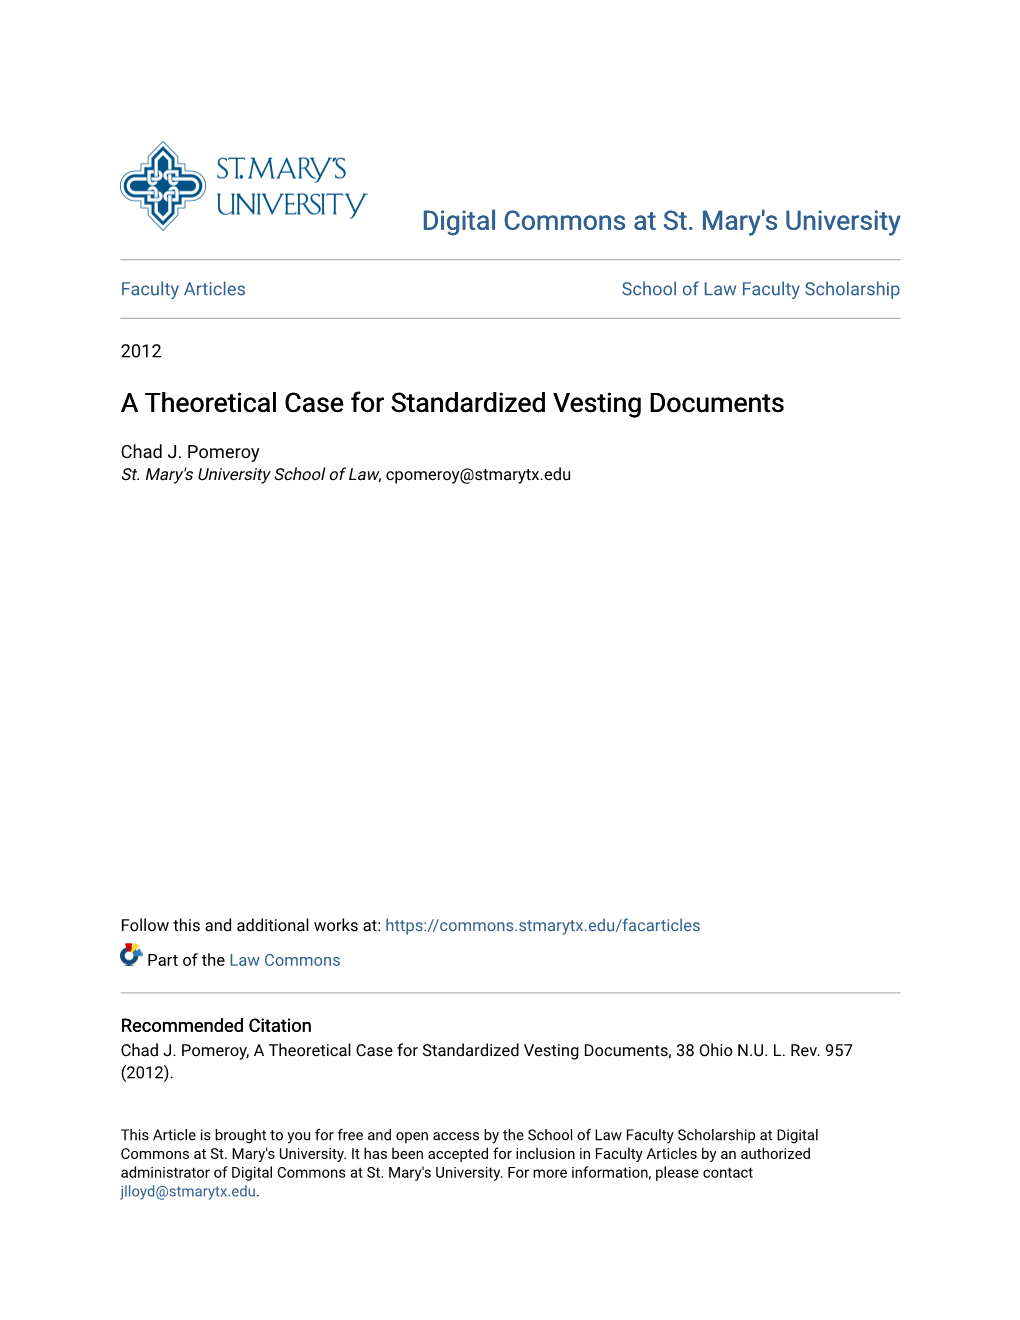 A Theoretical Case for Standardized Vesting Documents